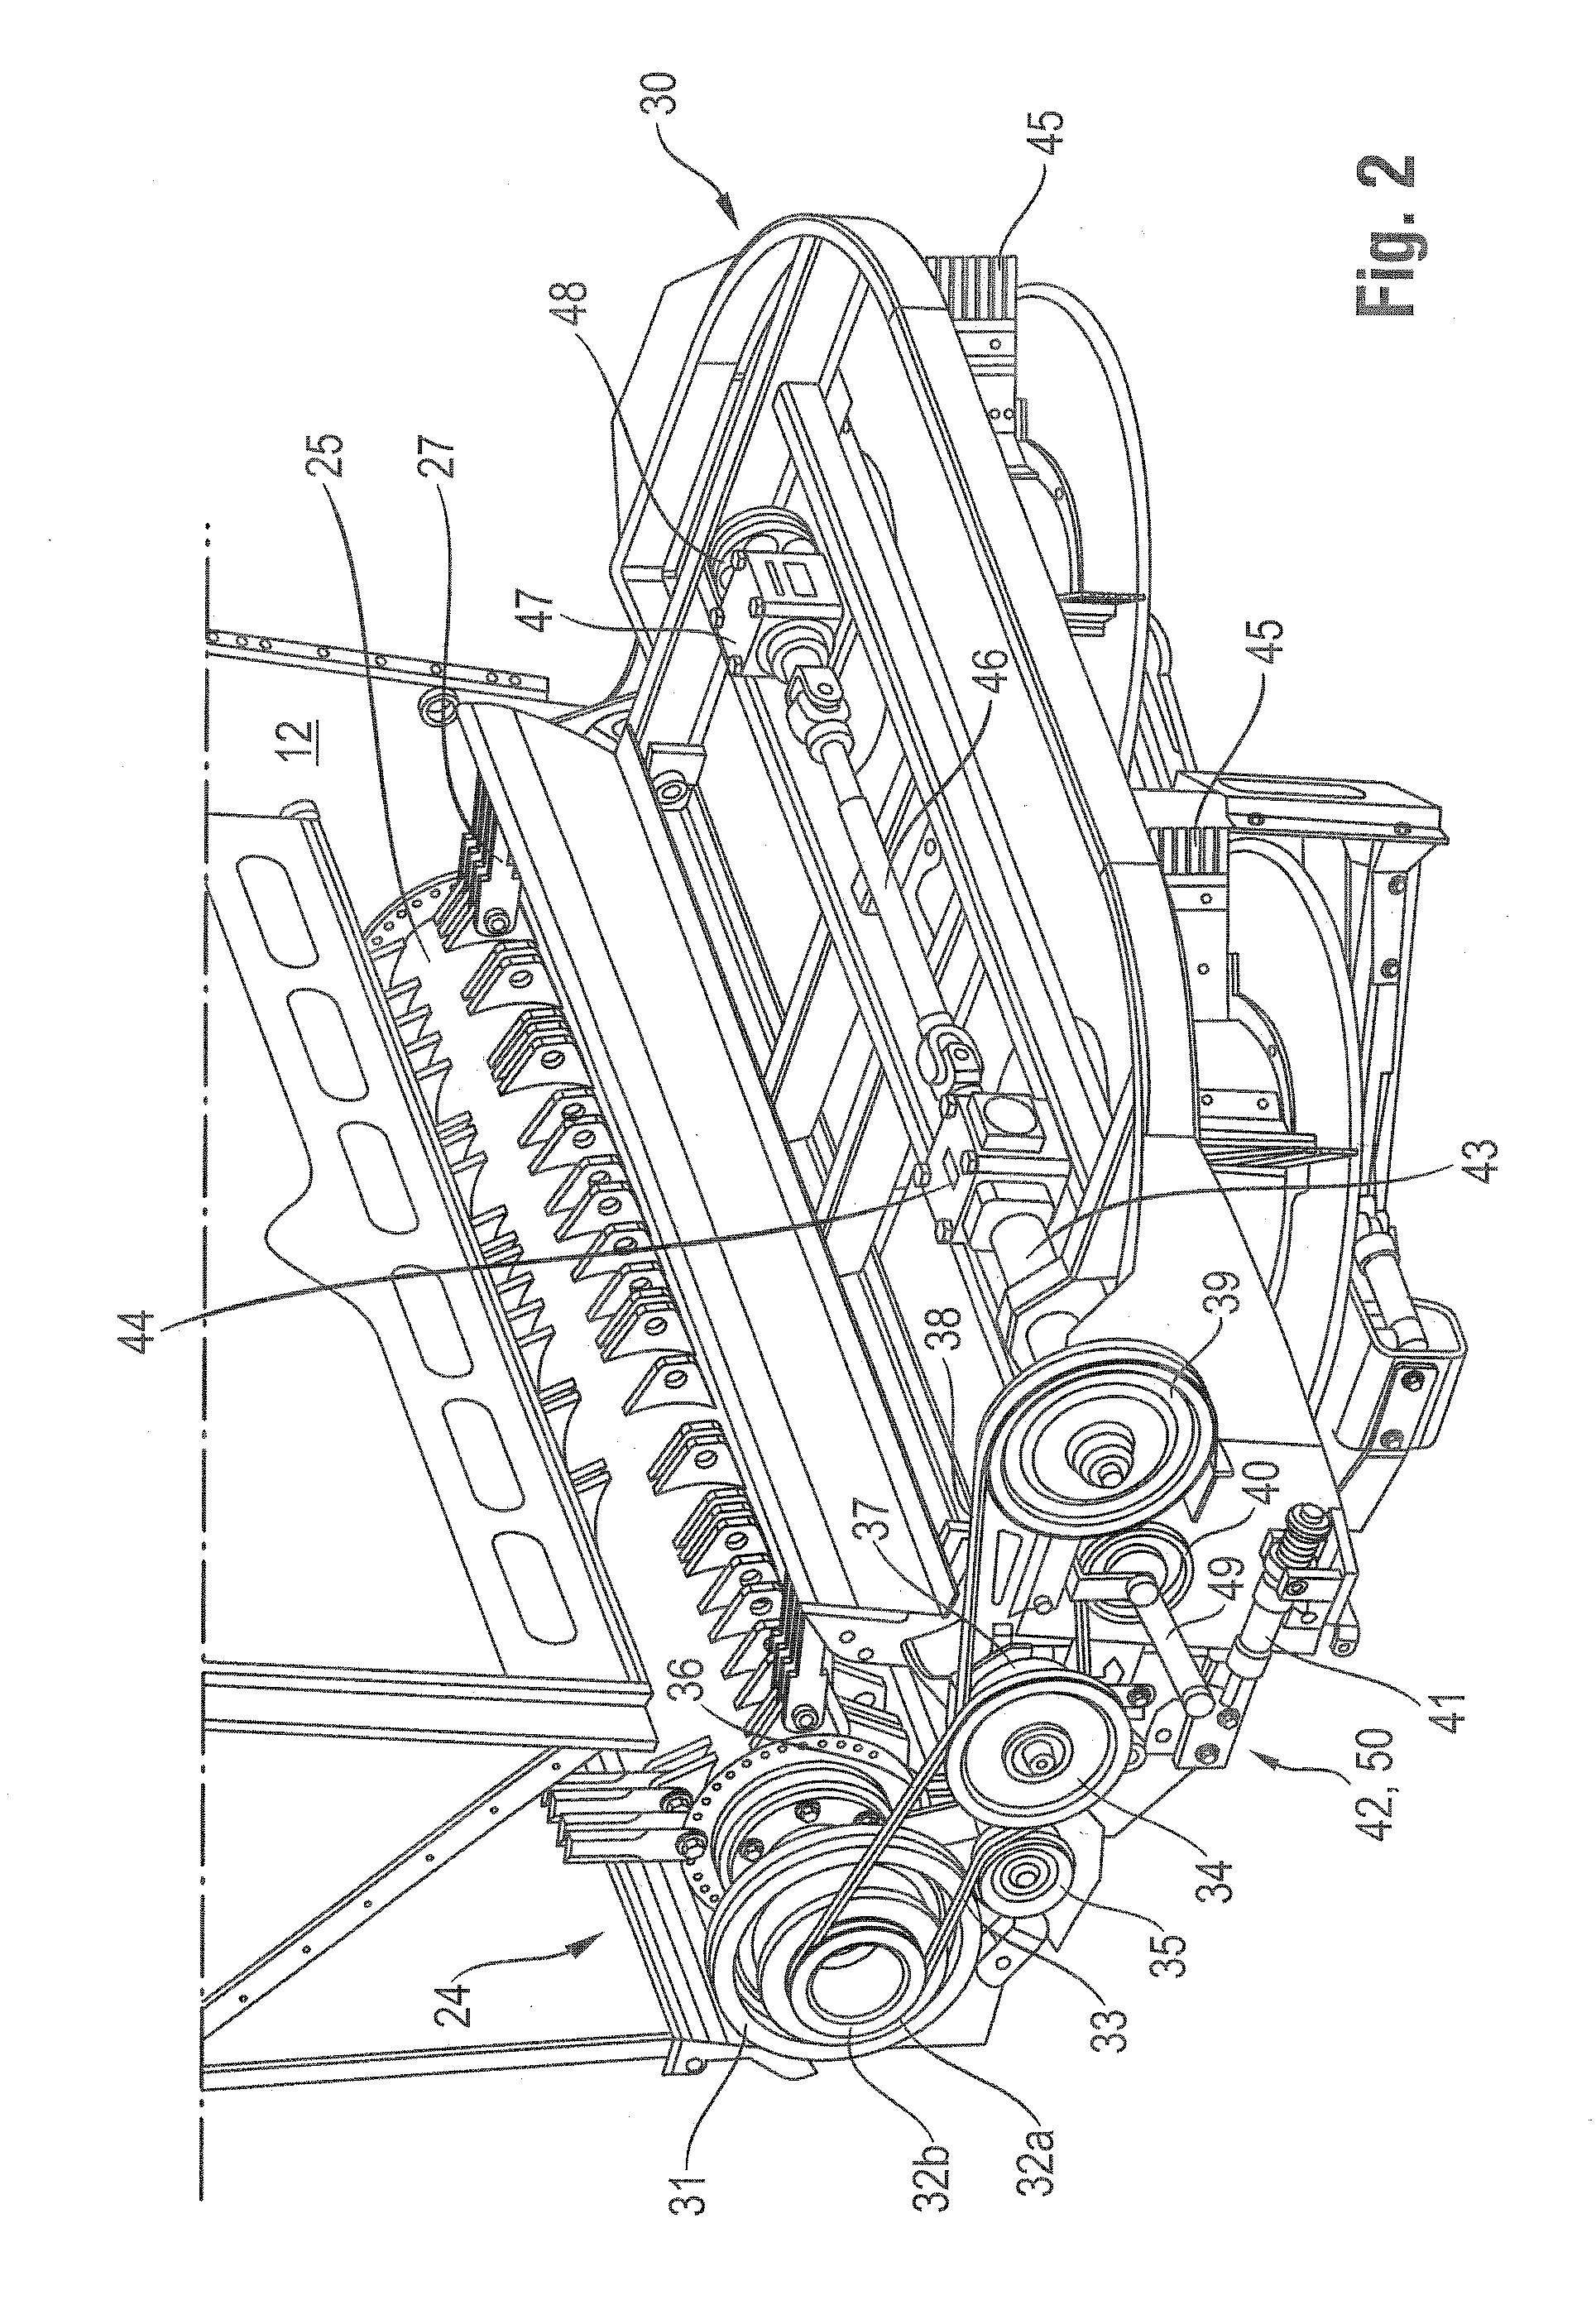 Combine harvester comprising a chopping mechanism